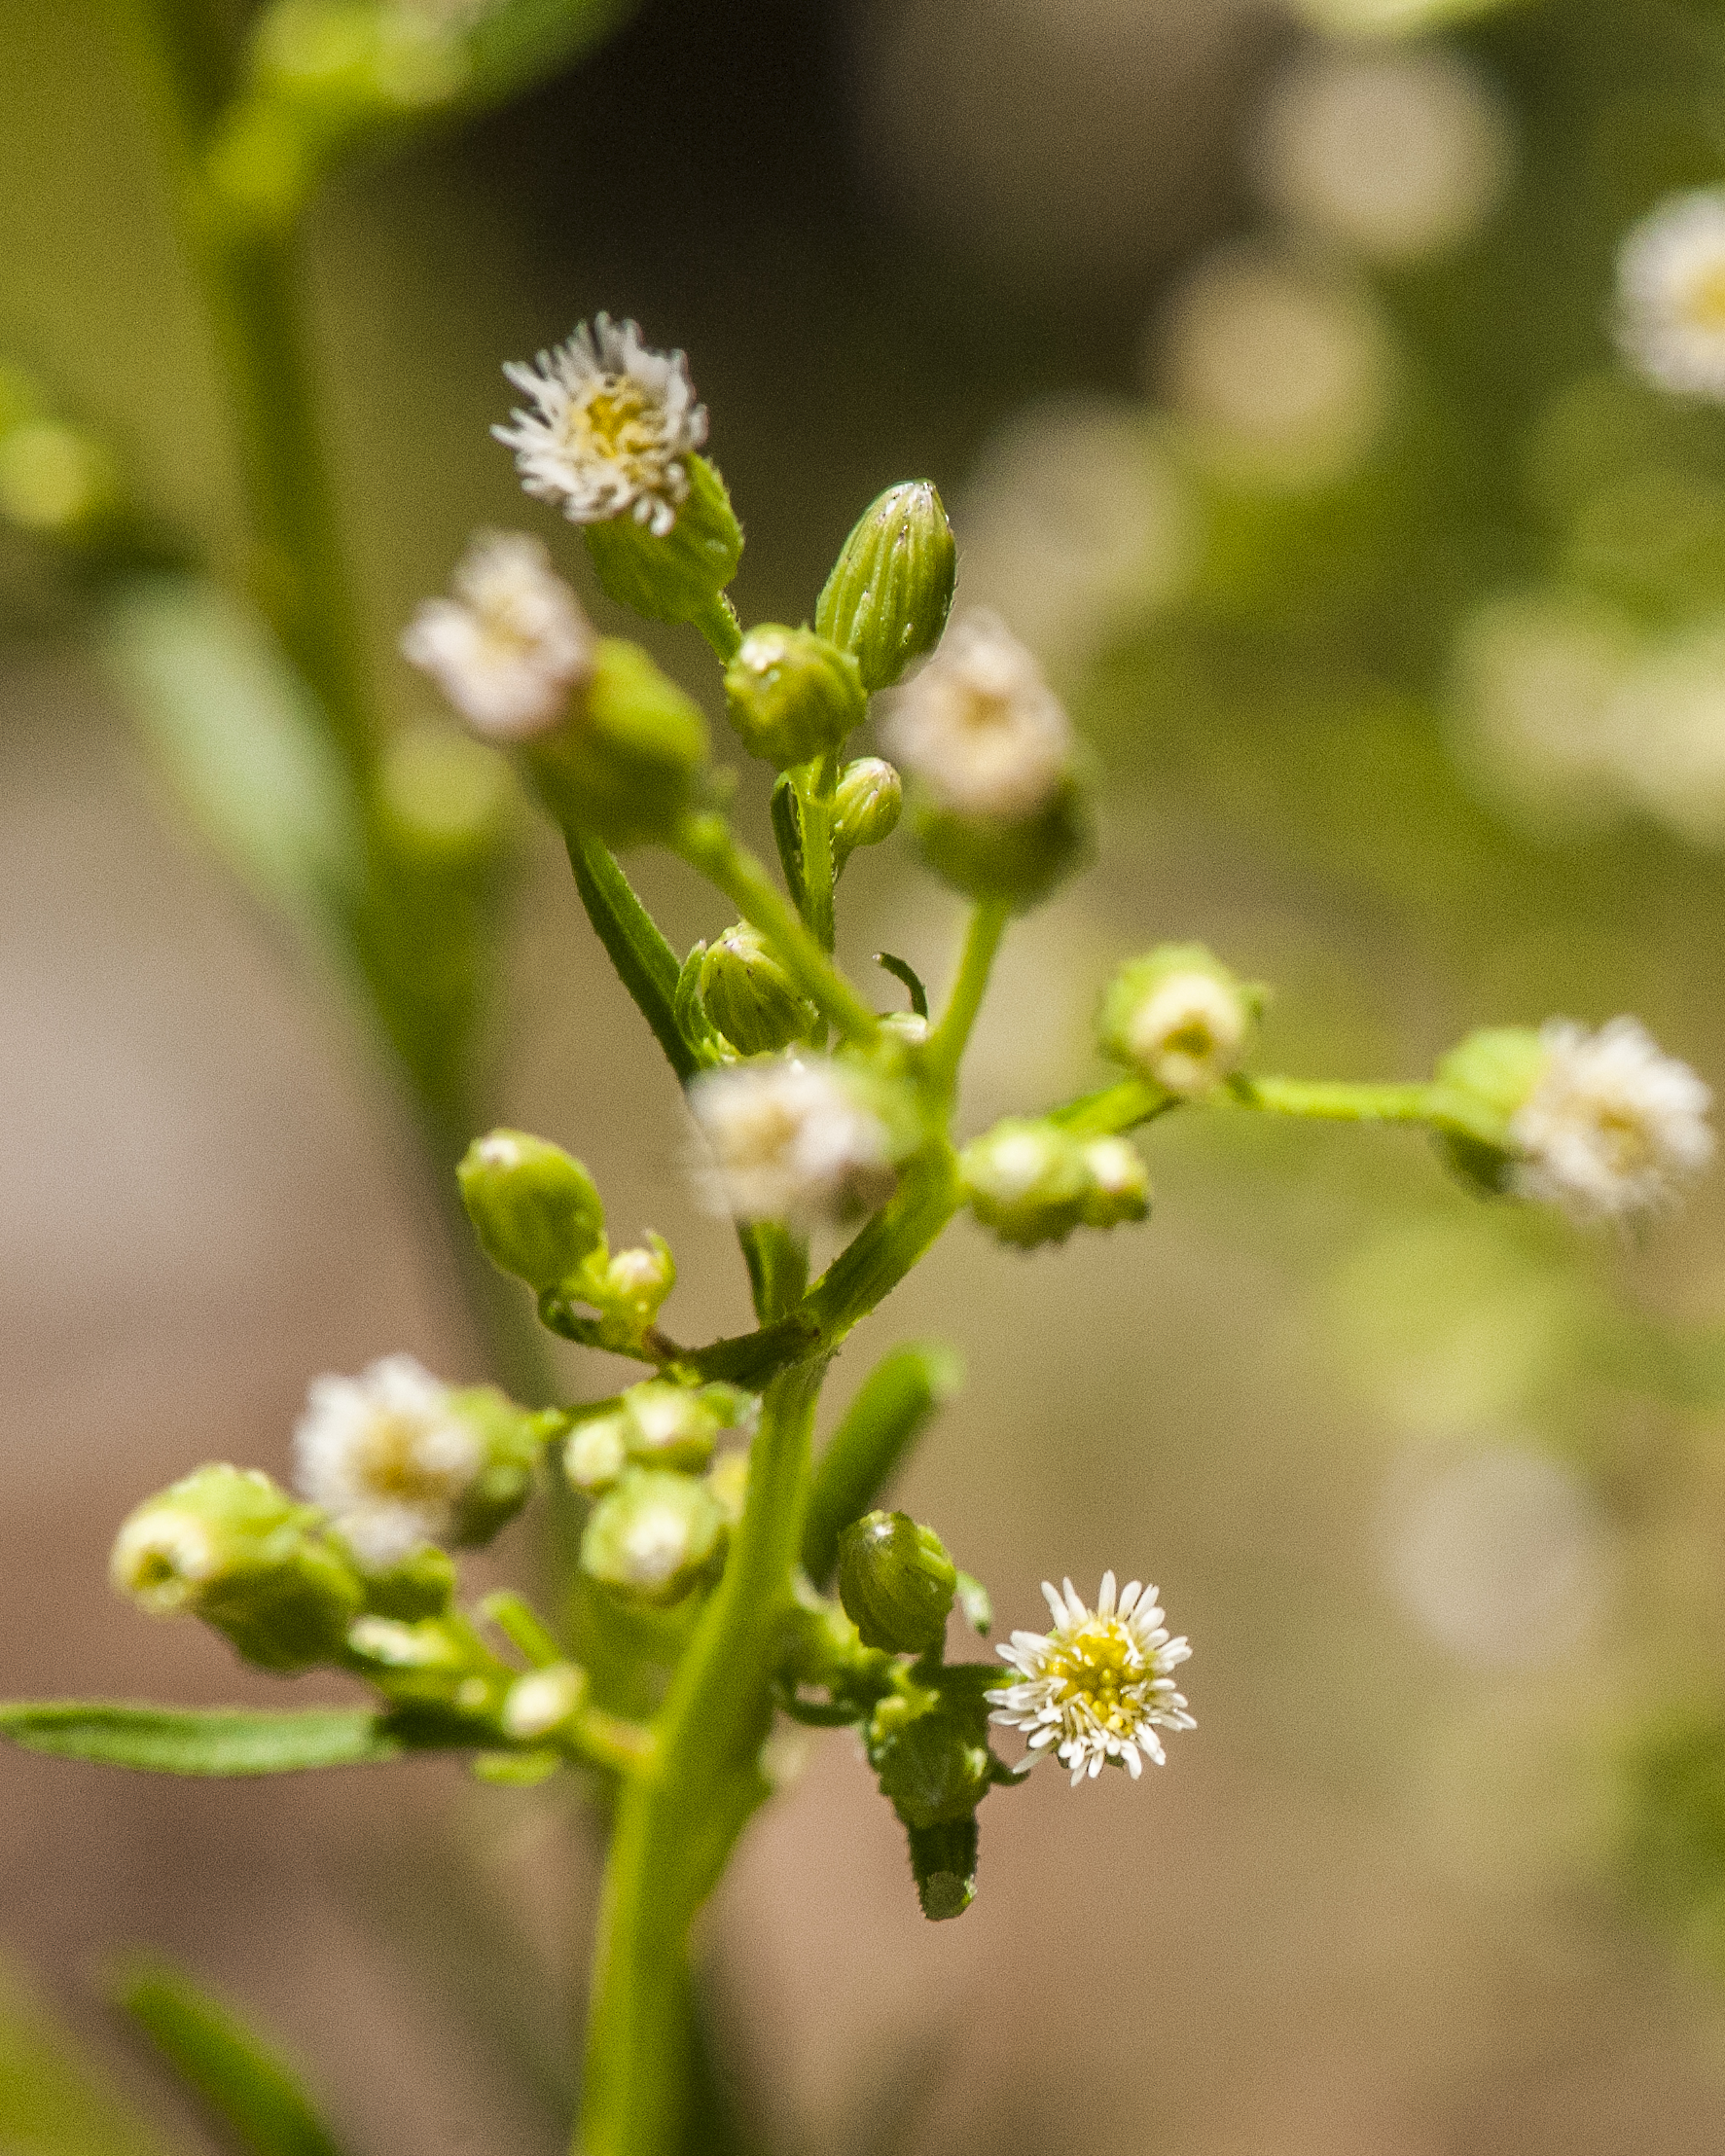 Canadian Horseweed Flower